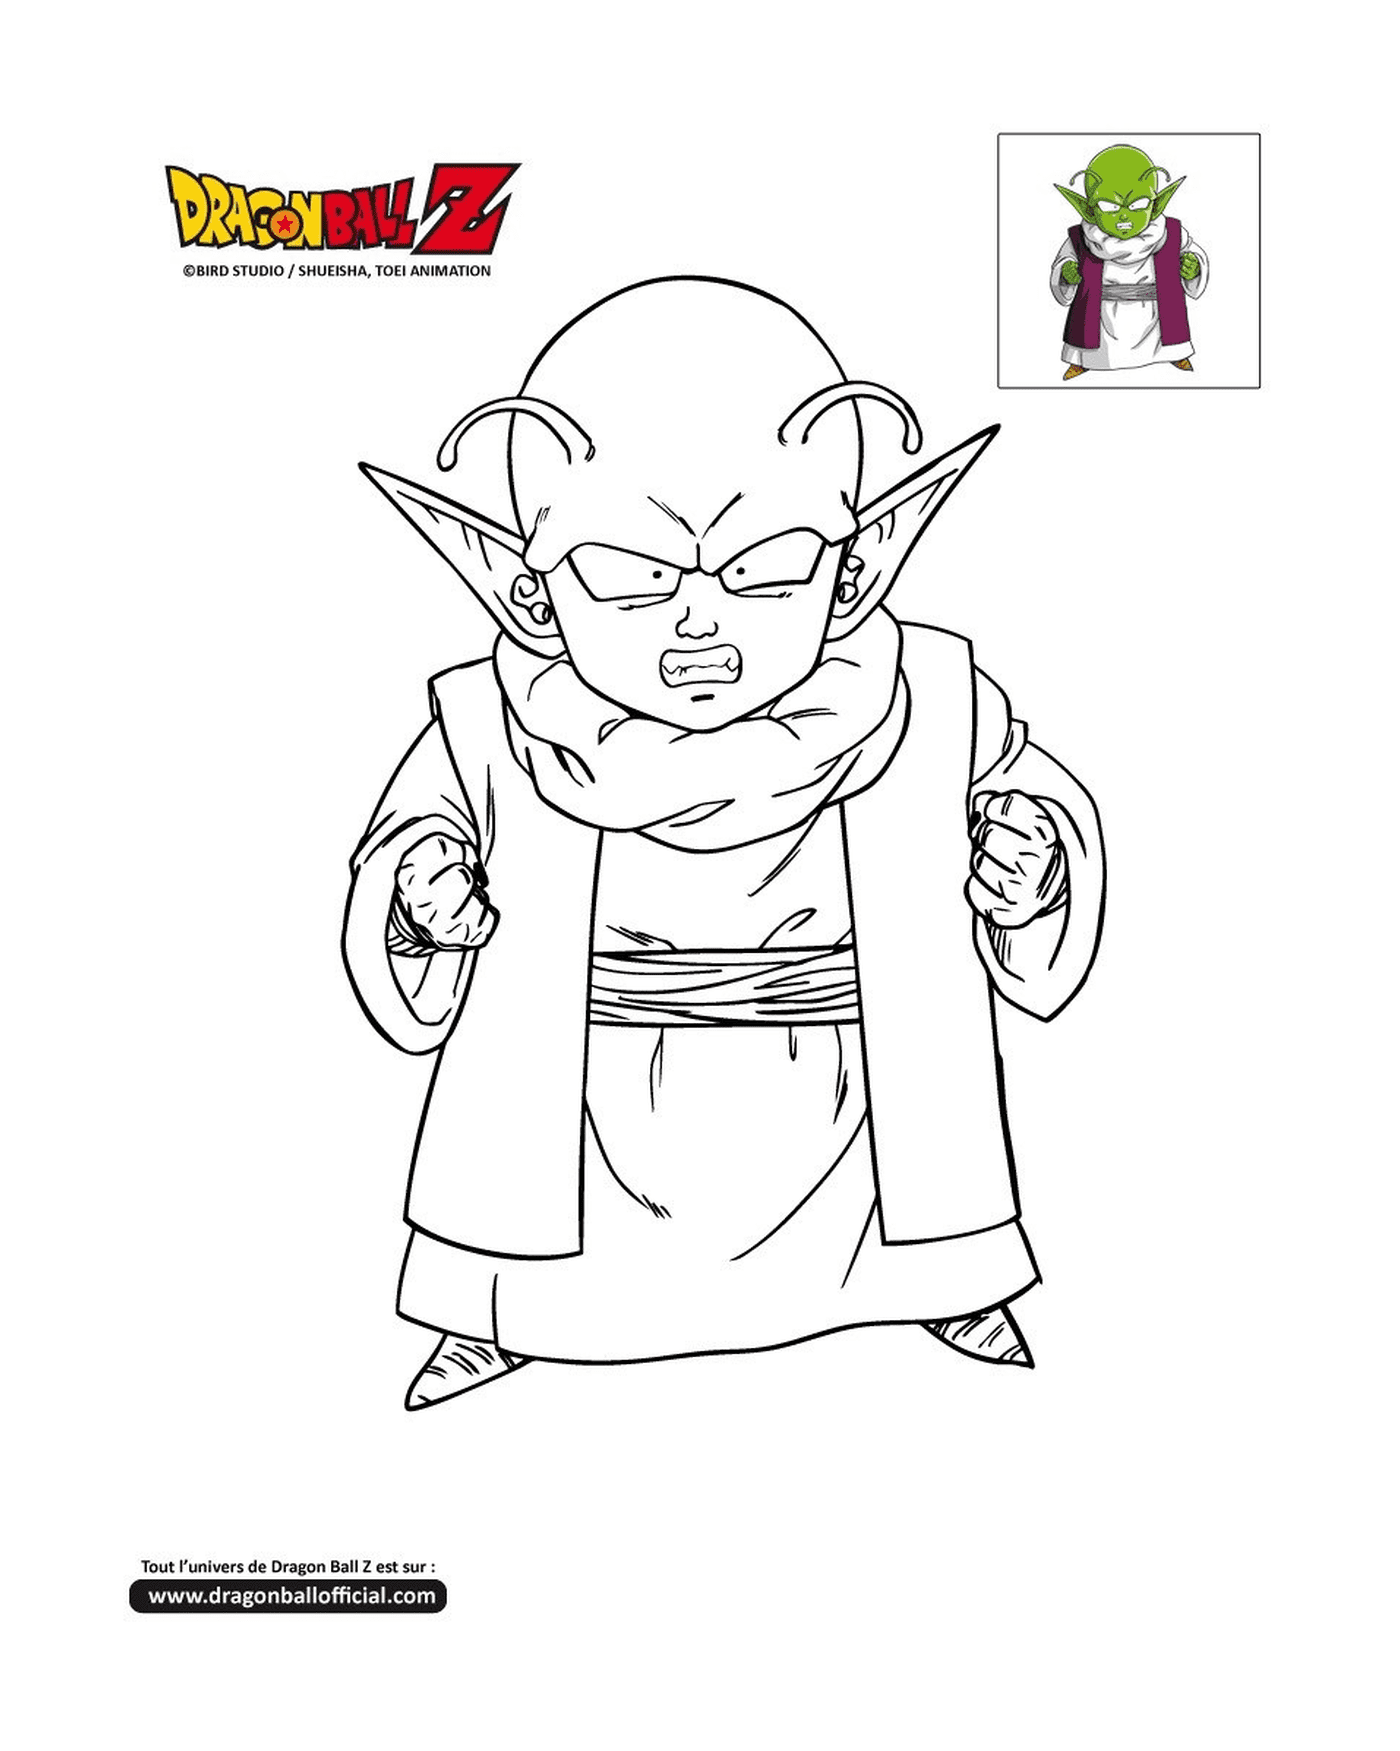  Dende, a kid dressed in Dragon Ball Z 